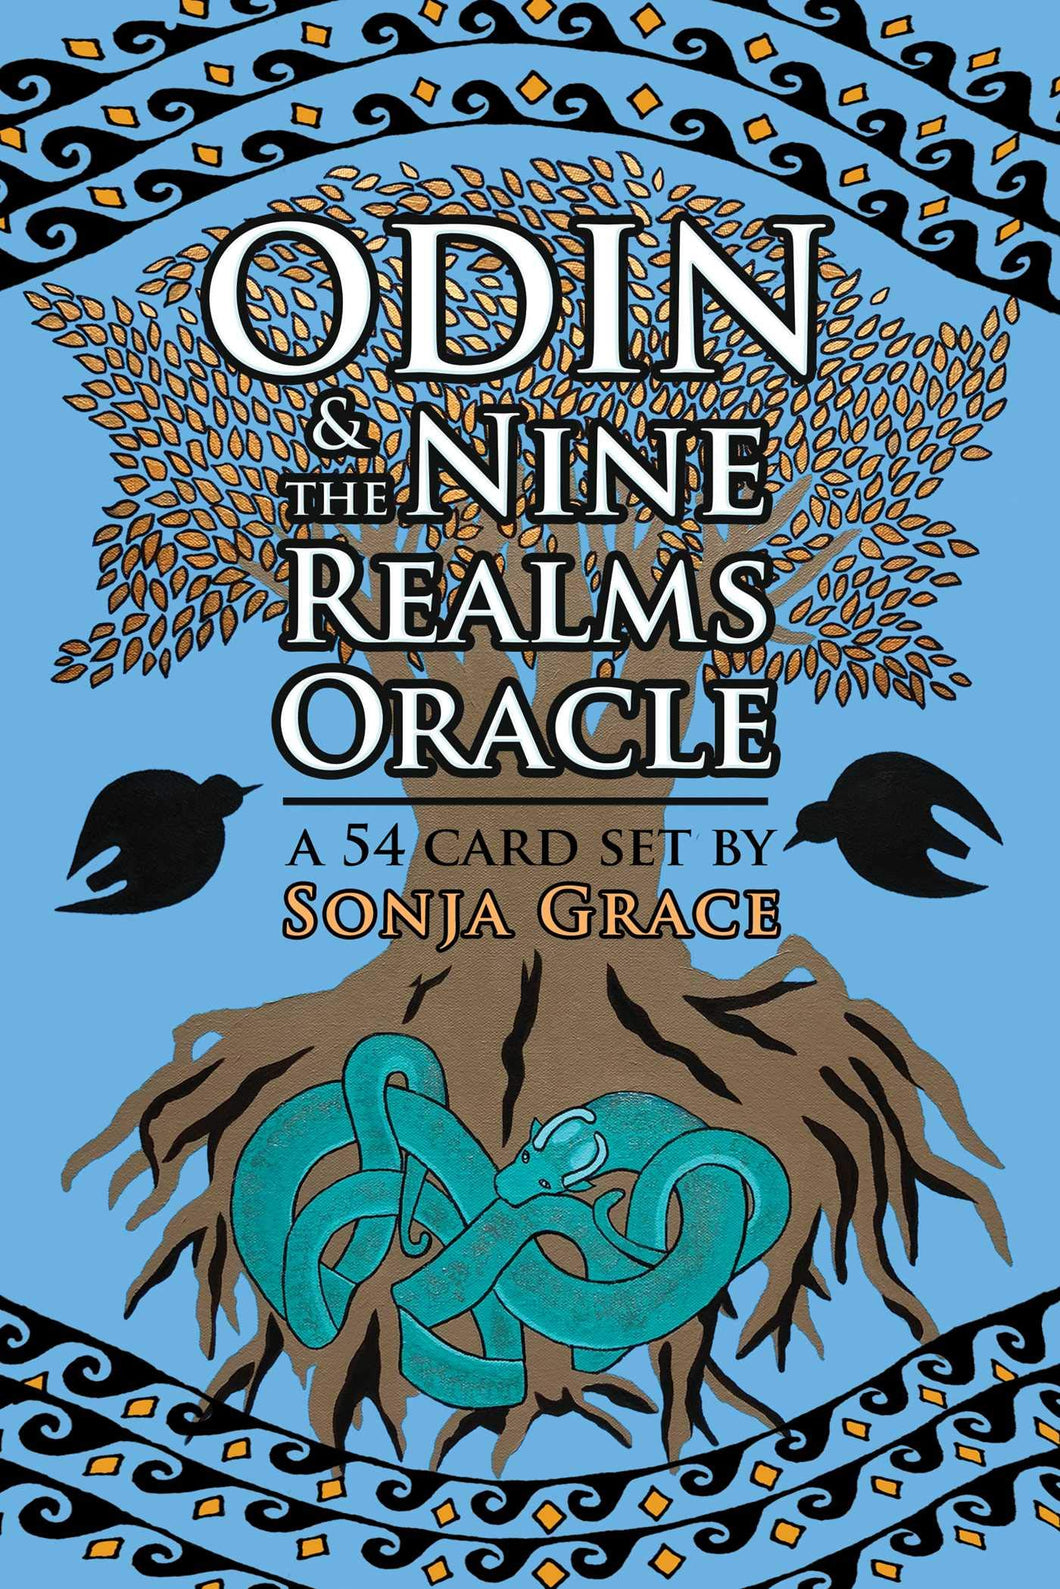 Odin and the Nine Realms Oracle